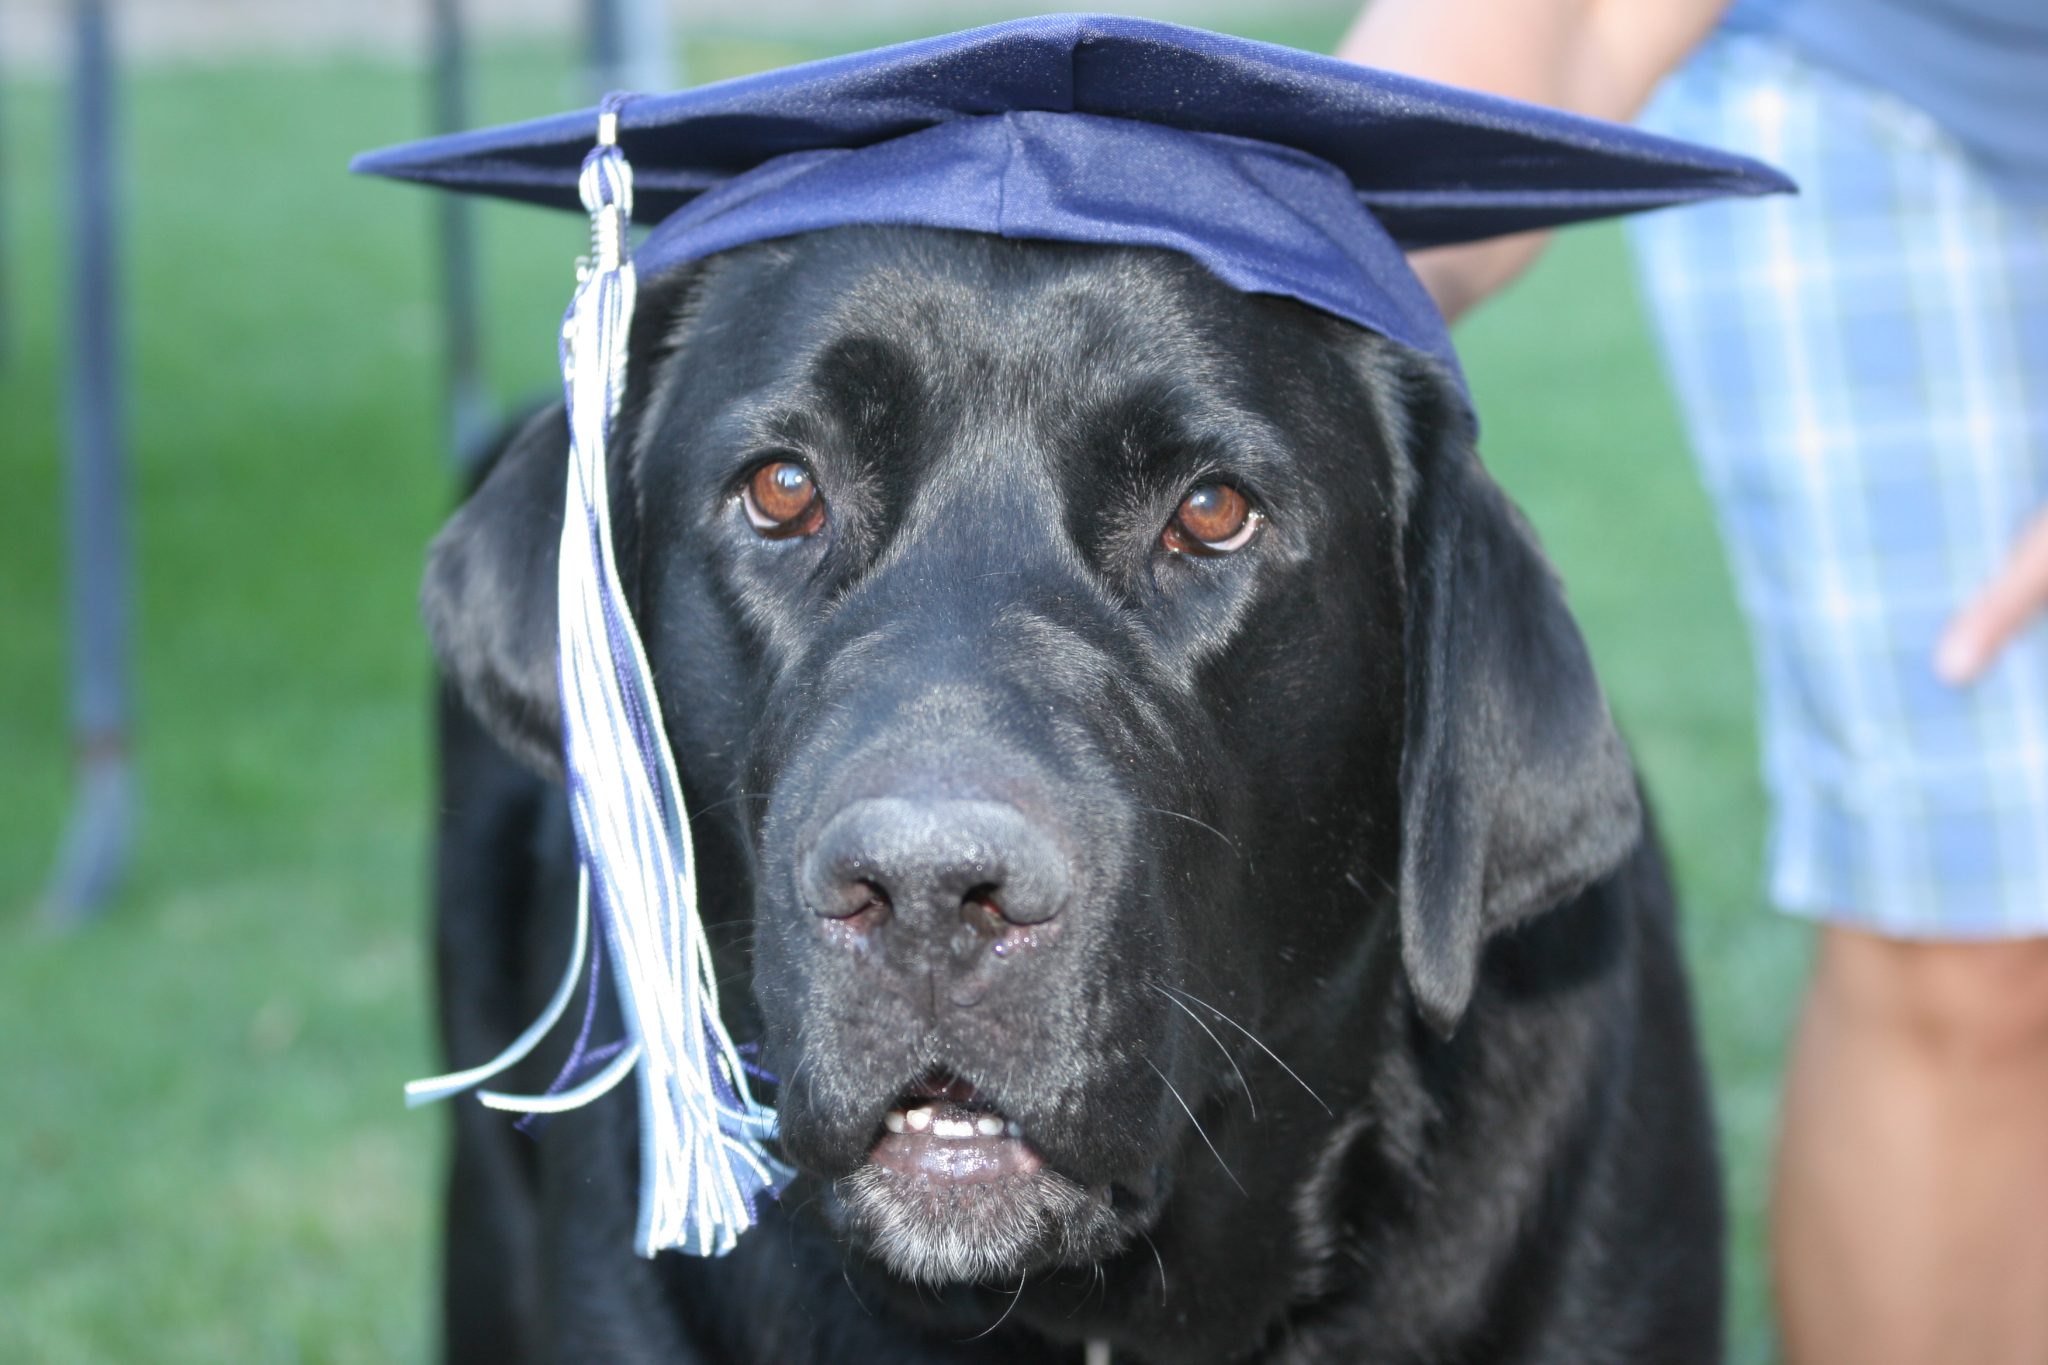 Looking into the face of a large dog wearing a graduation cap.